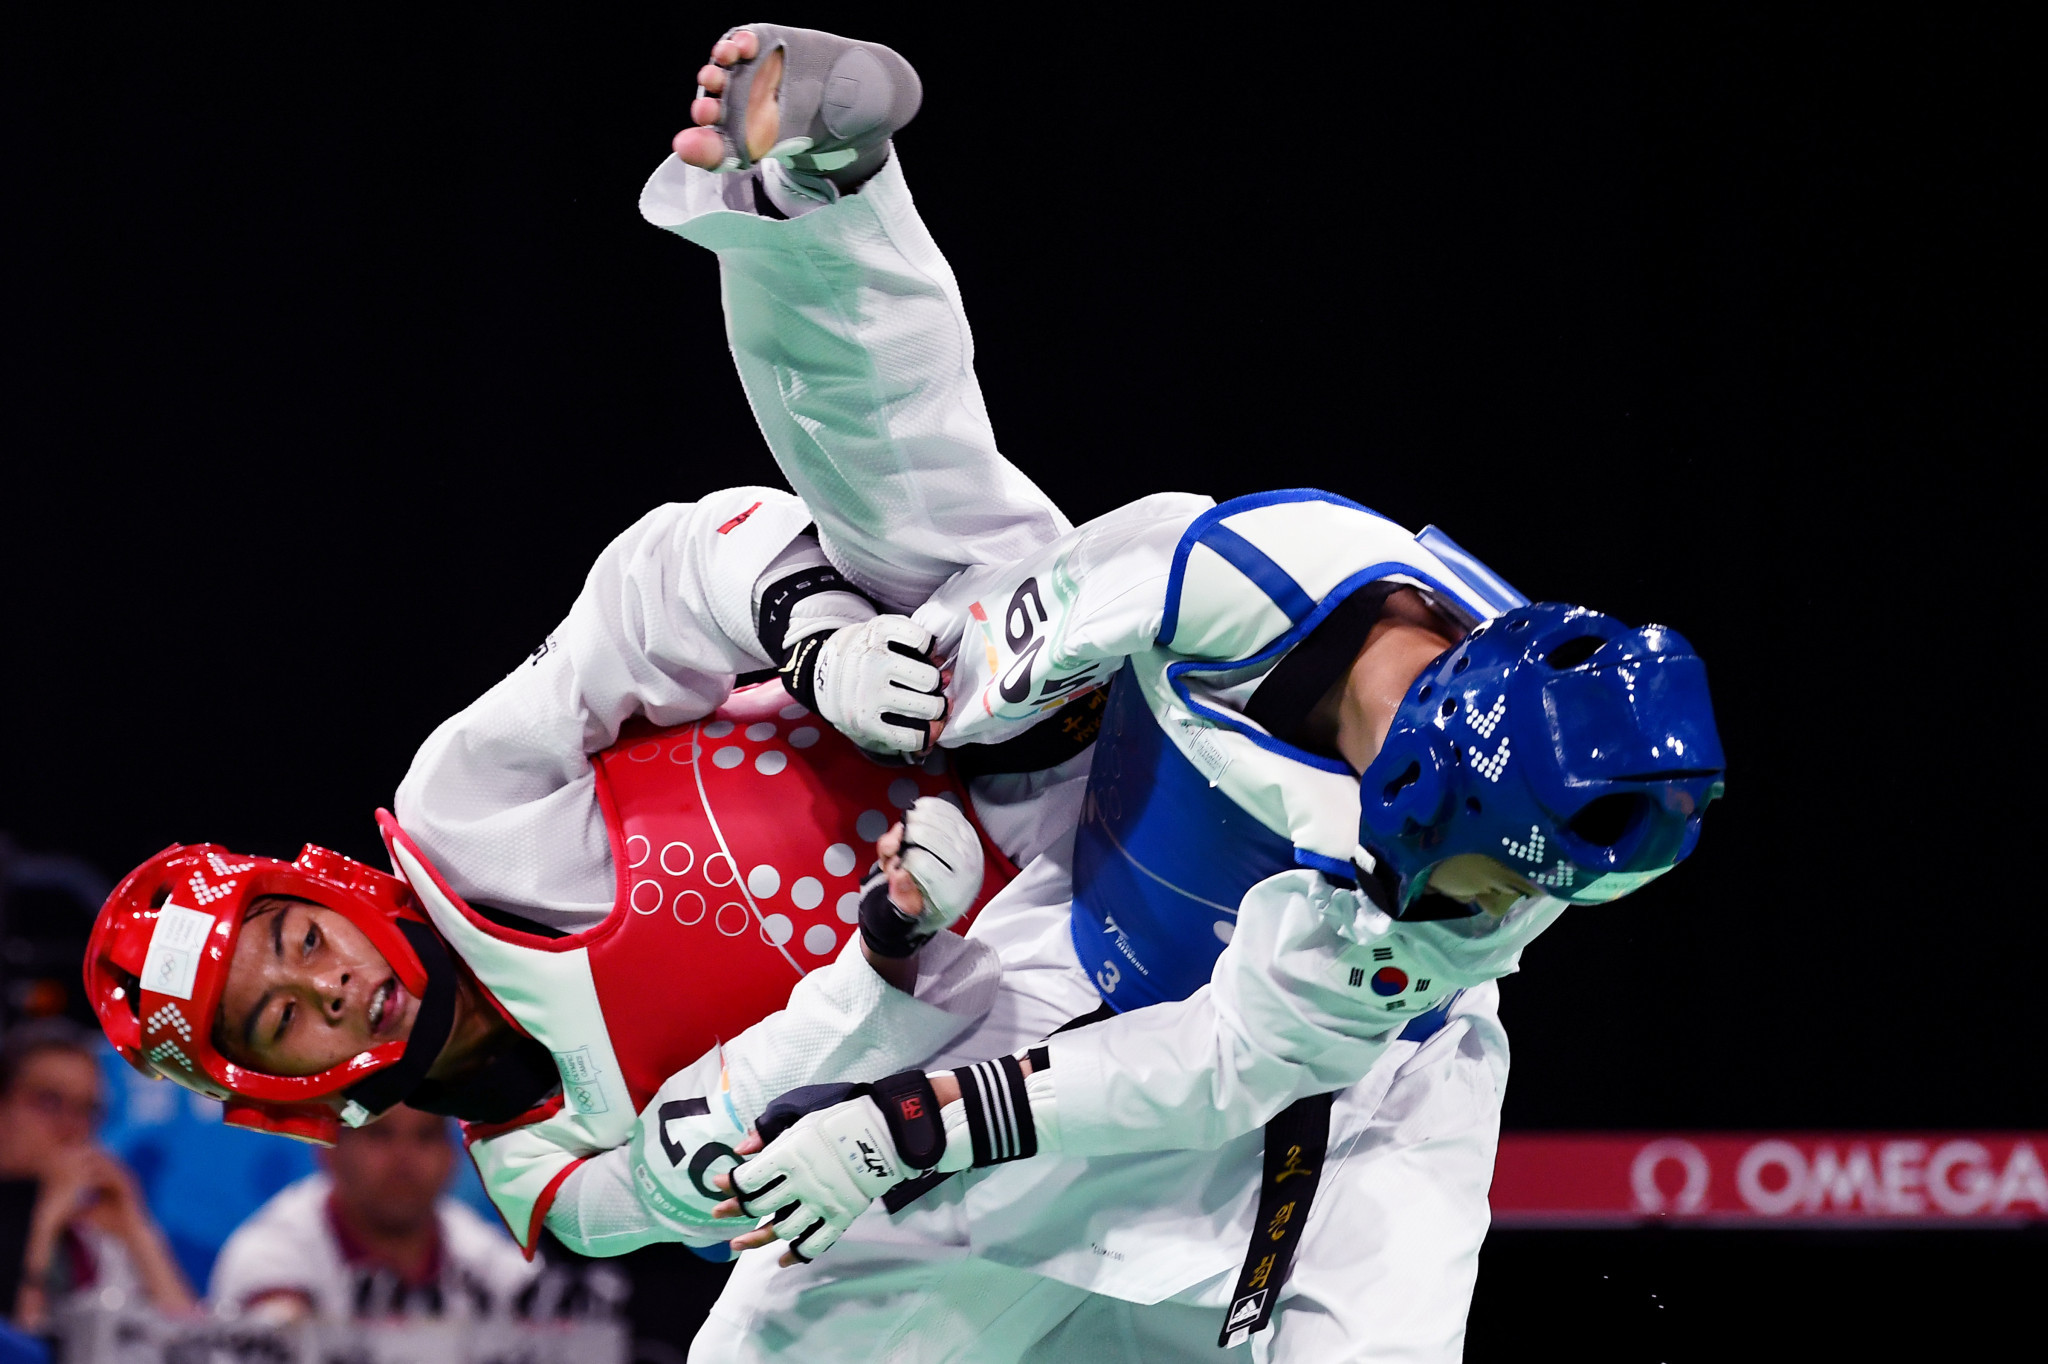 Taekwondo was among the medal events on the third day at Buenos Aires 2018 ©Getty Images